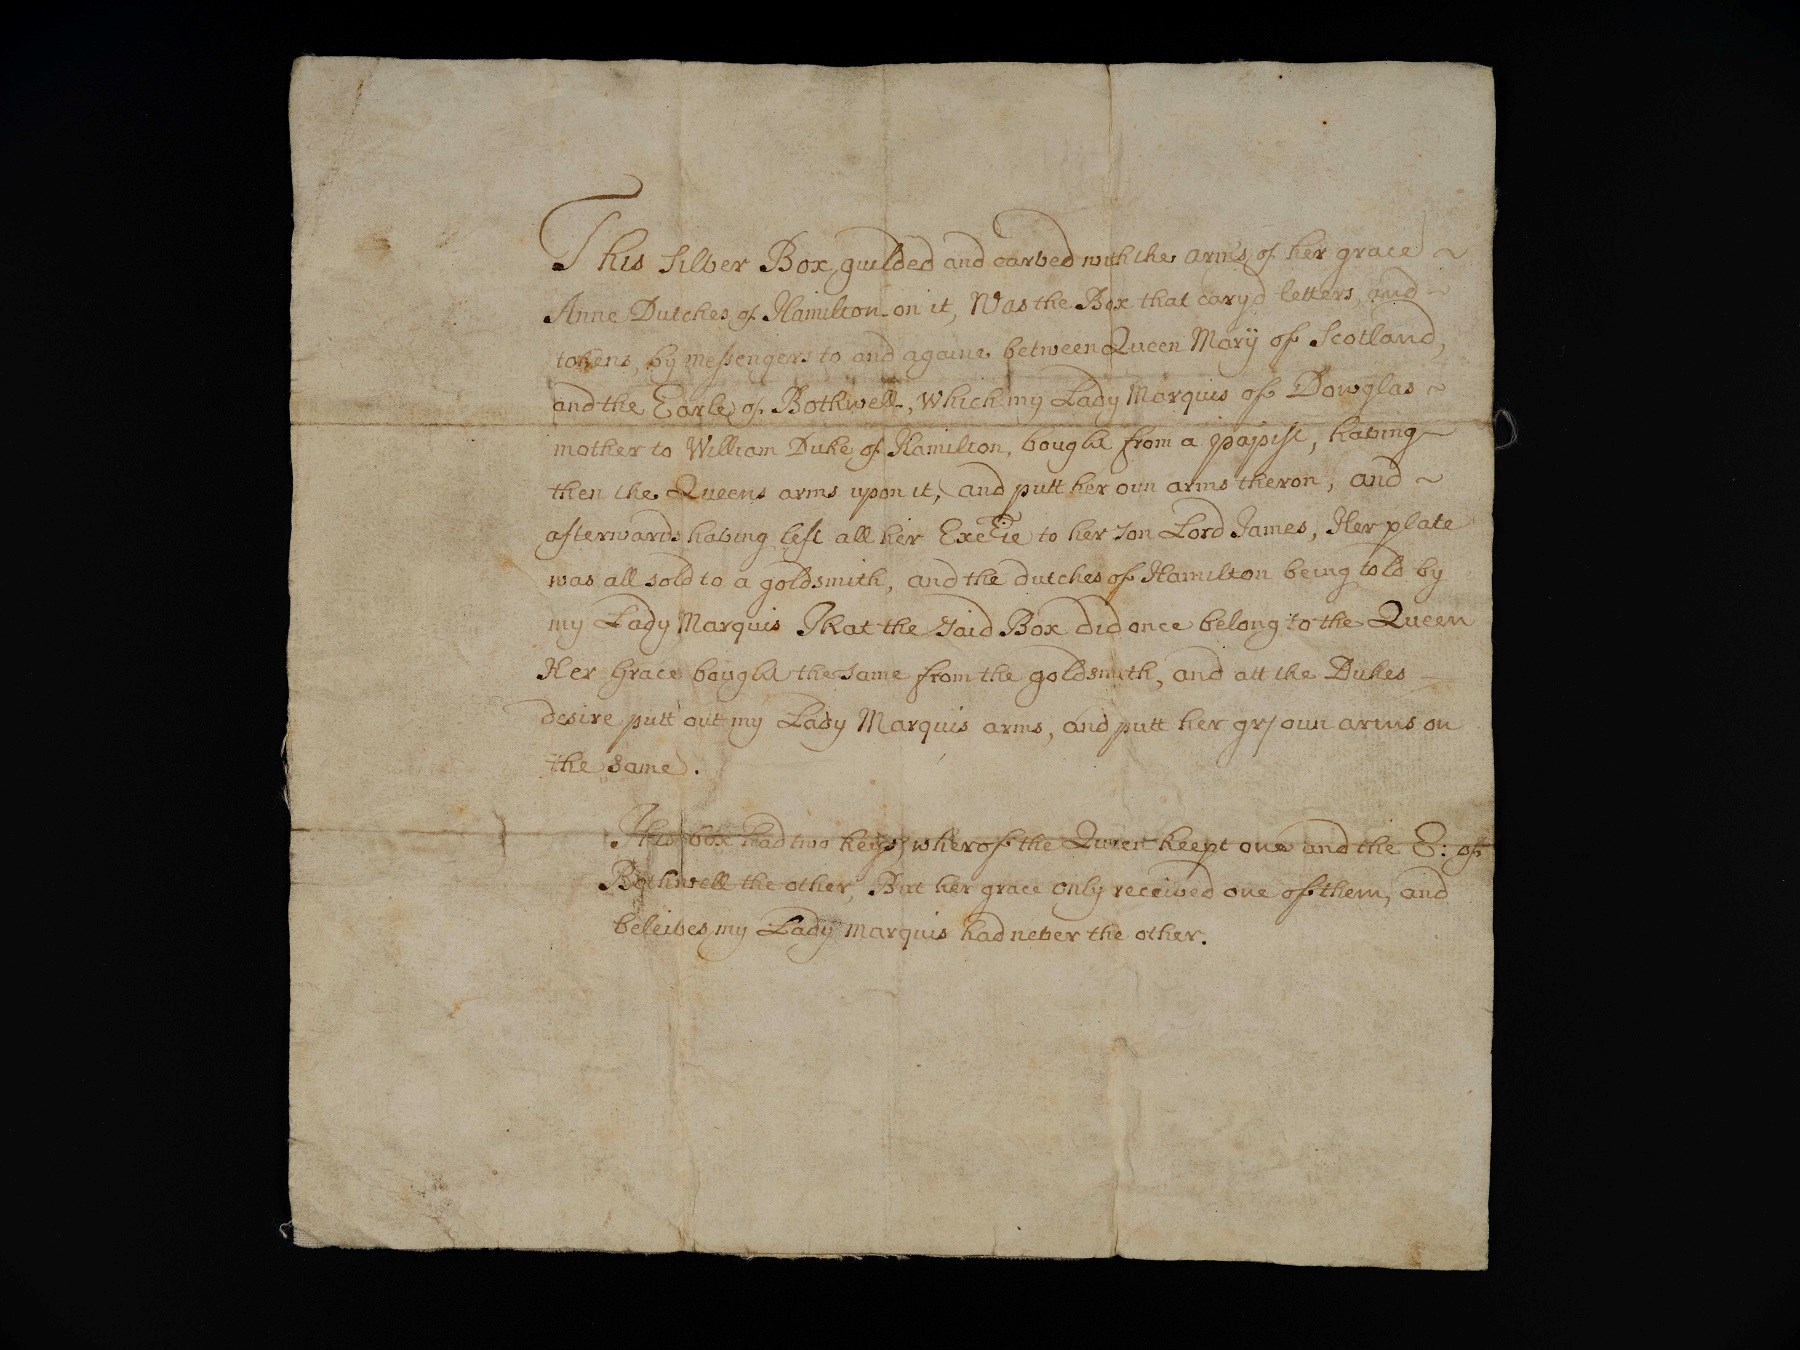 Letter on faded yellow paper. Faded black cursive lettering covers two-thirds of the paper's surface, stilted towards the right side.